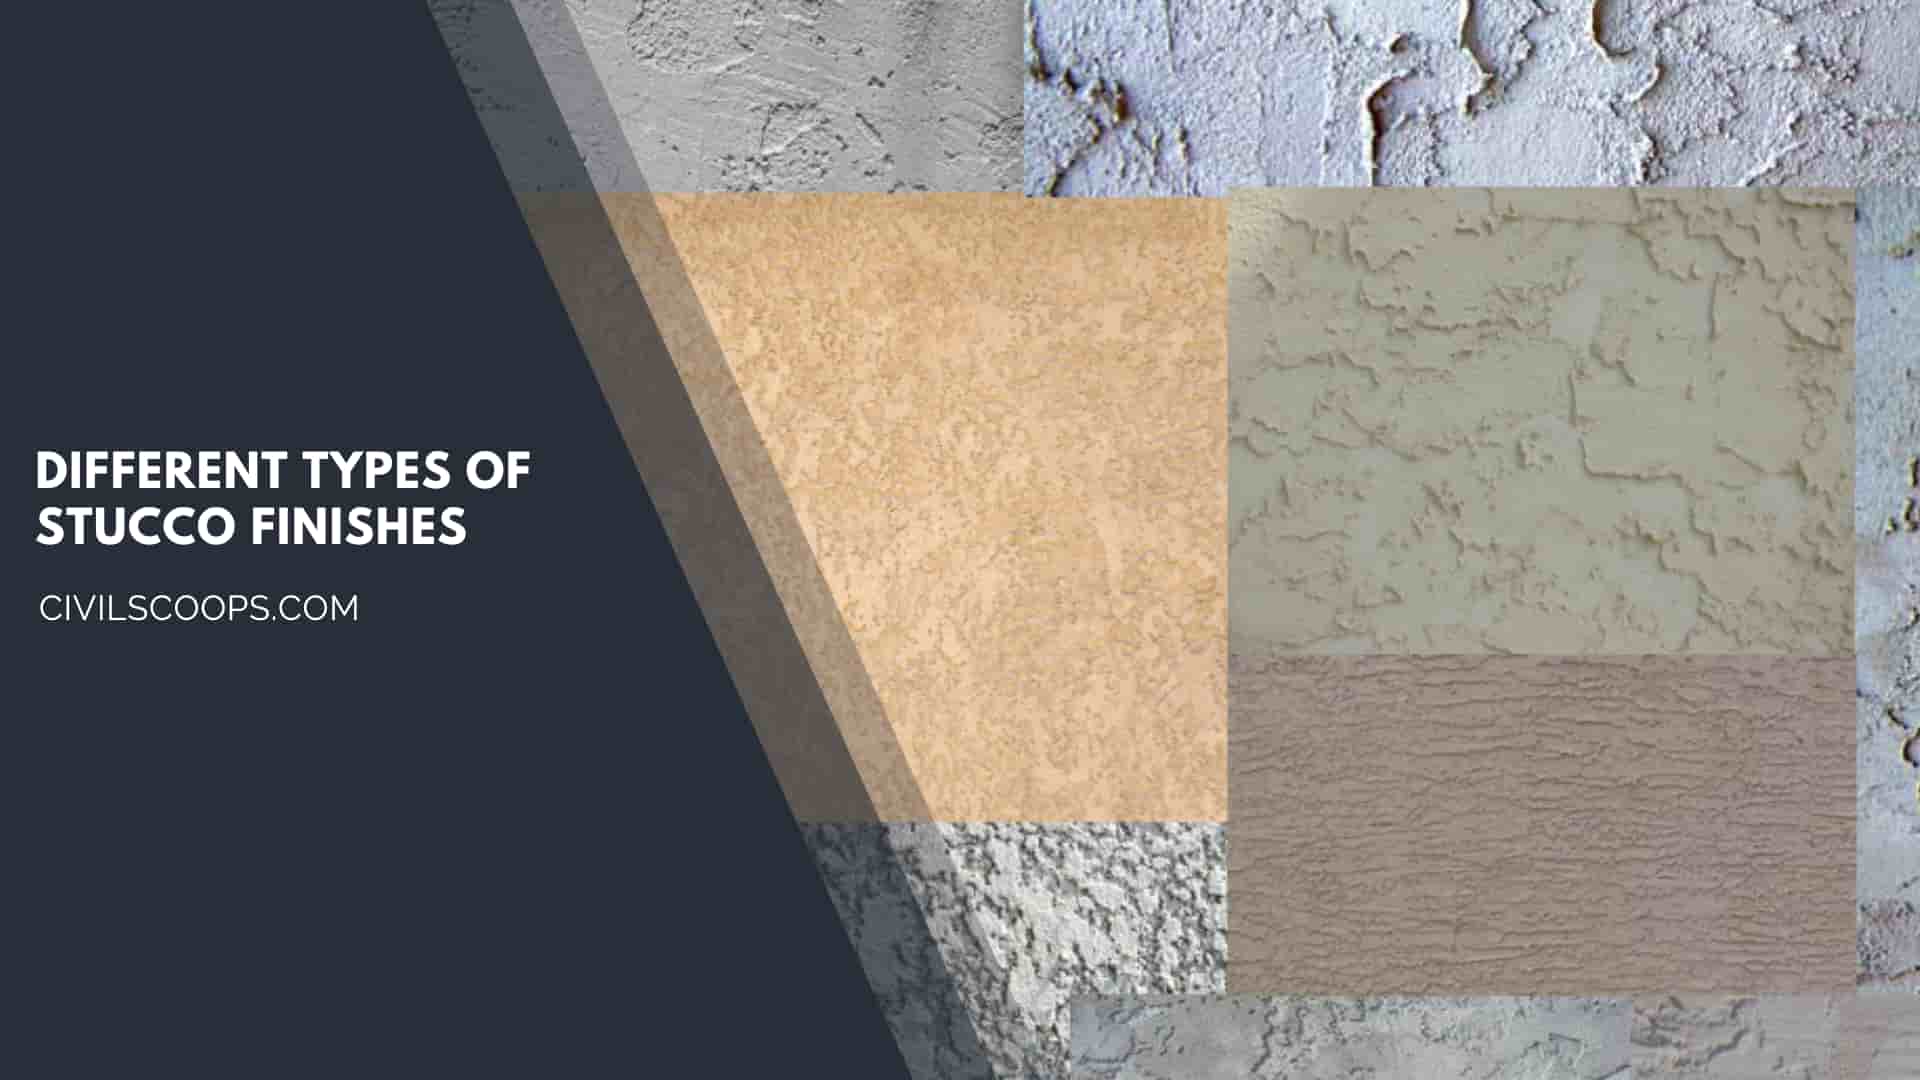 Different Types of Stucco Finishes